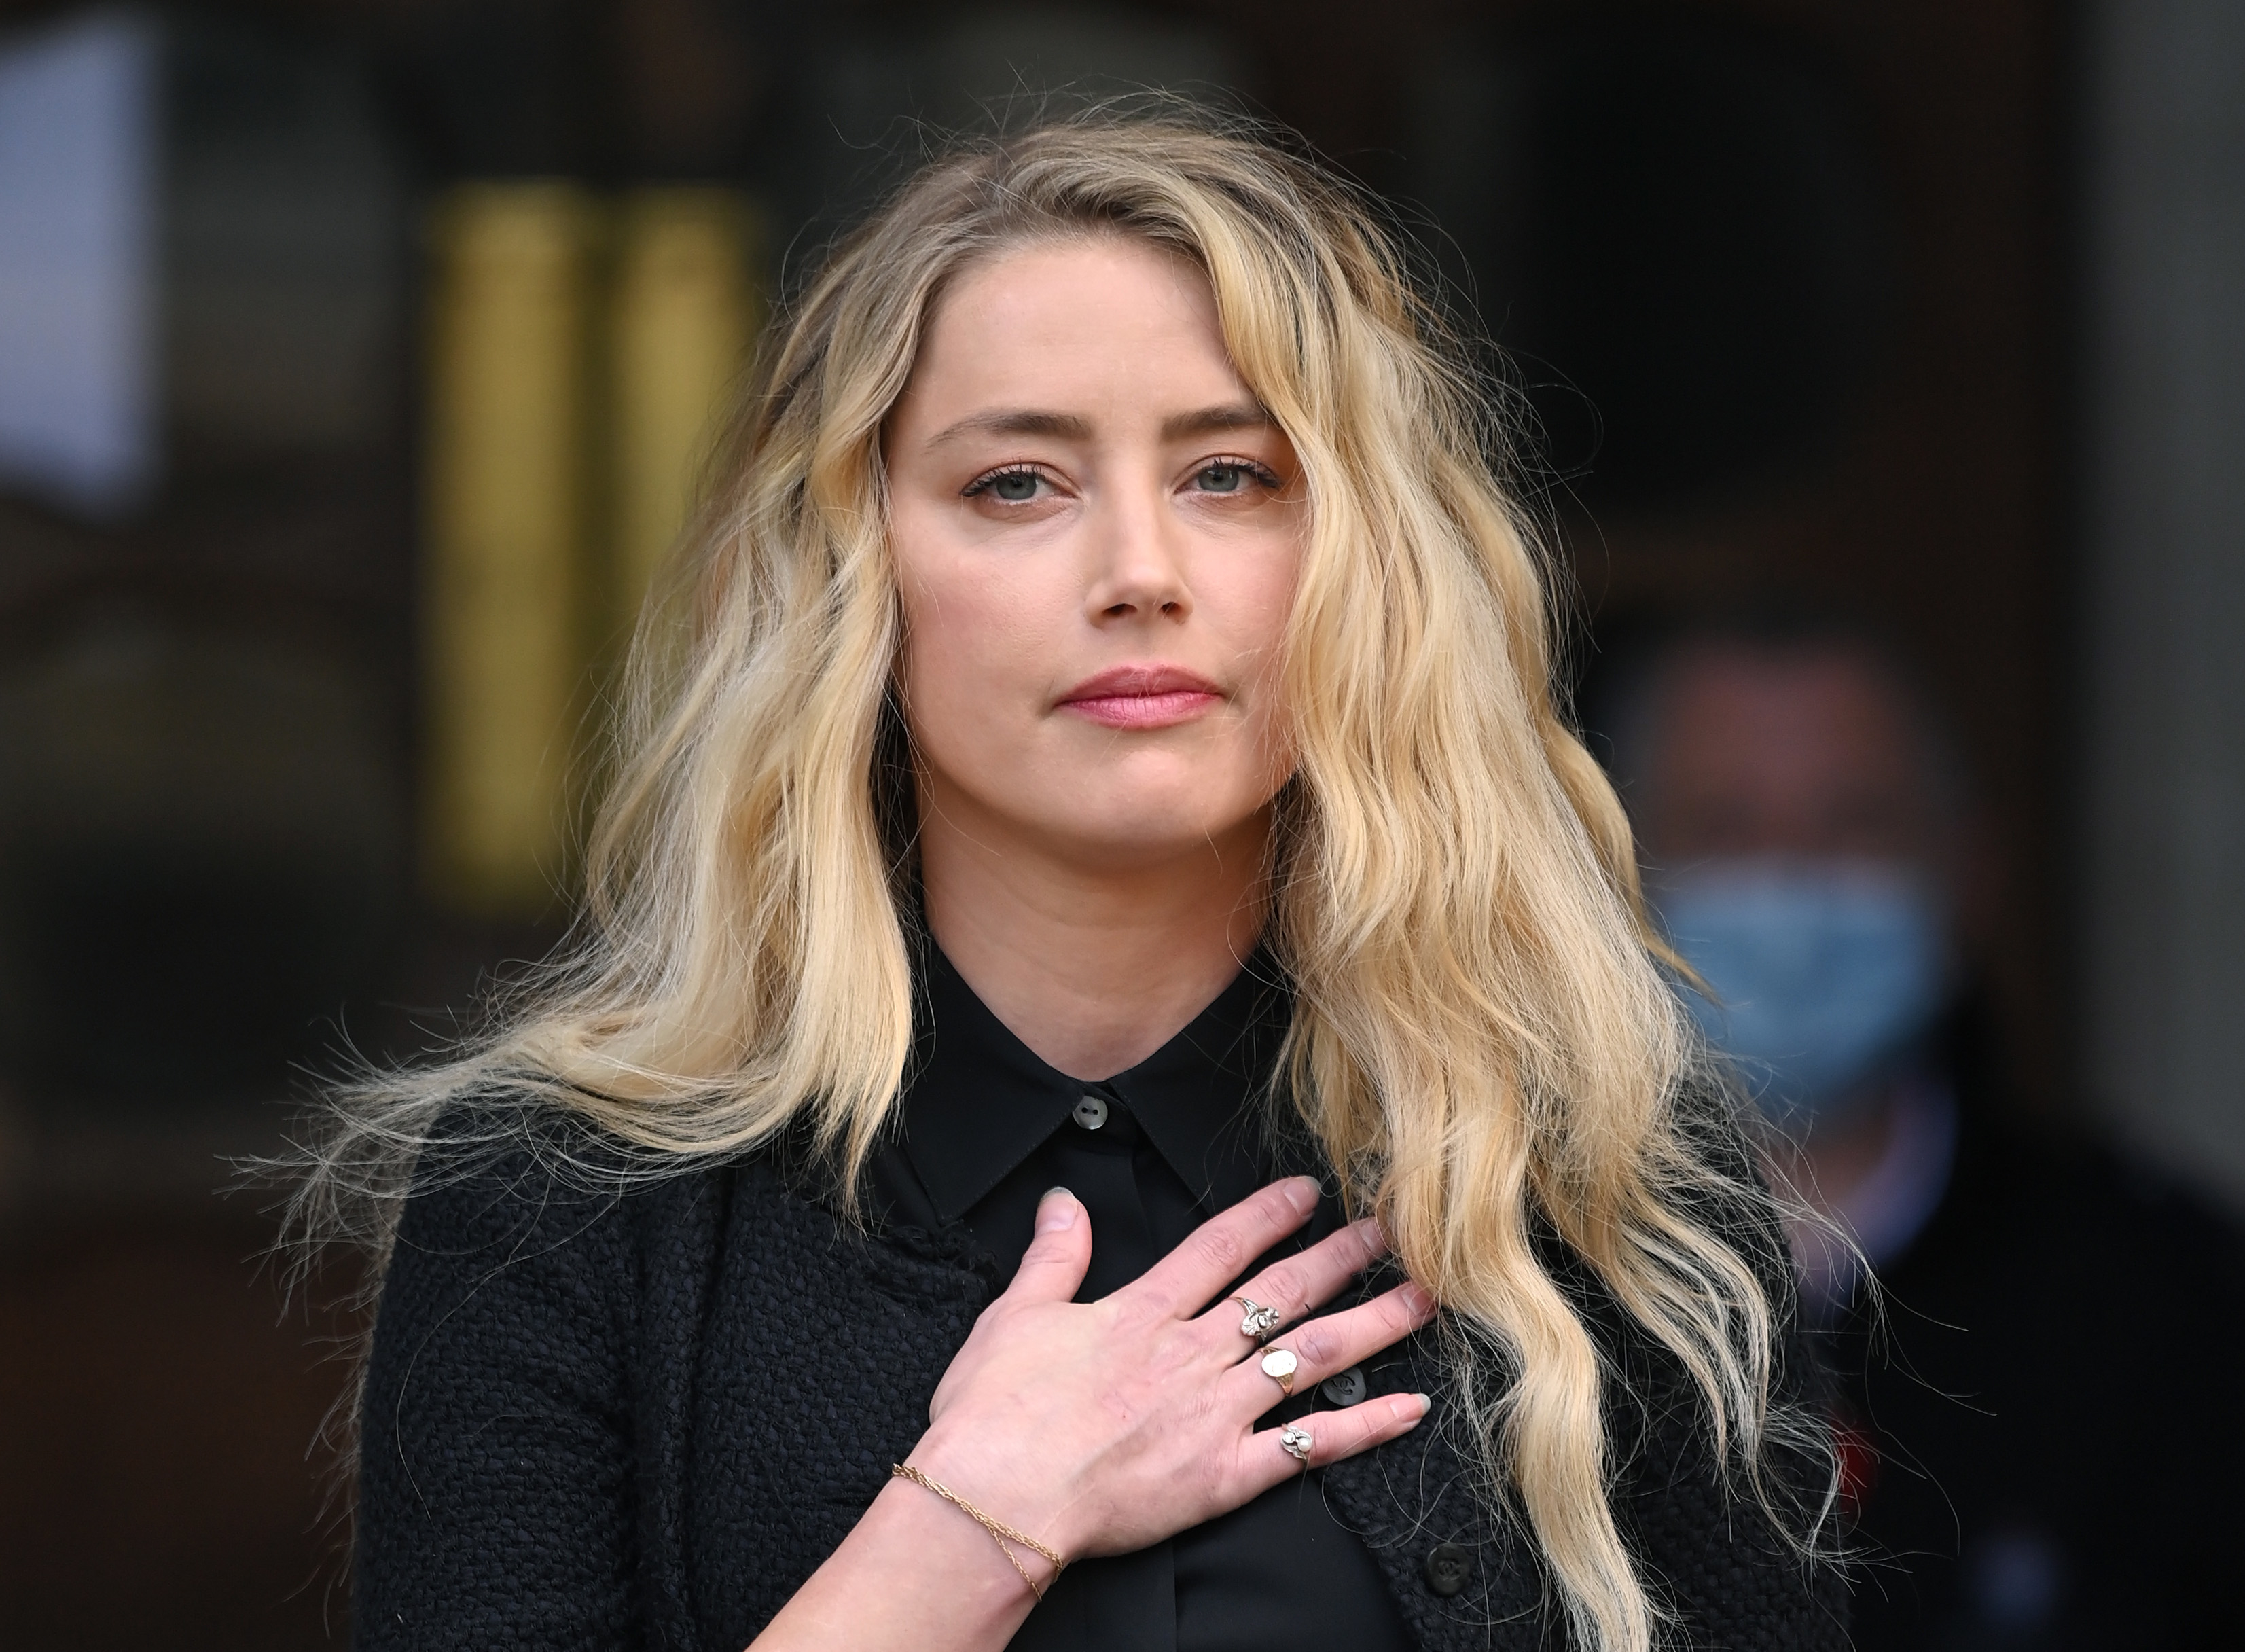 Amber Heard with her hand over her heart